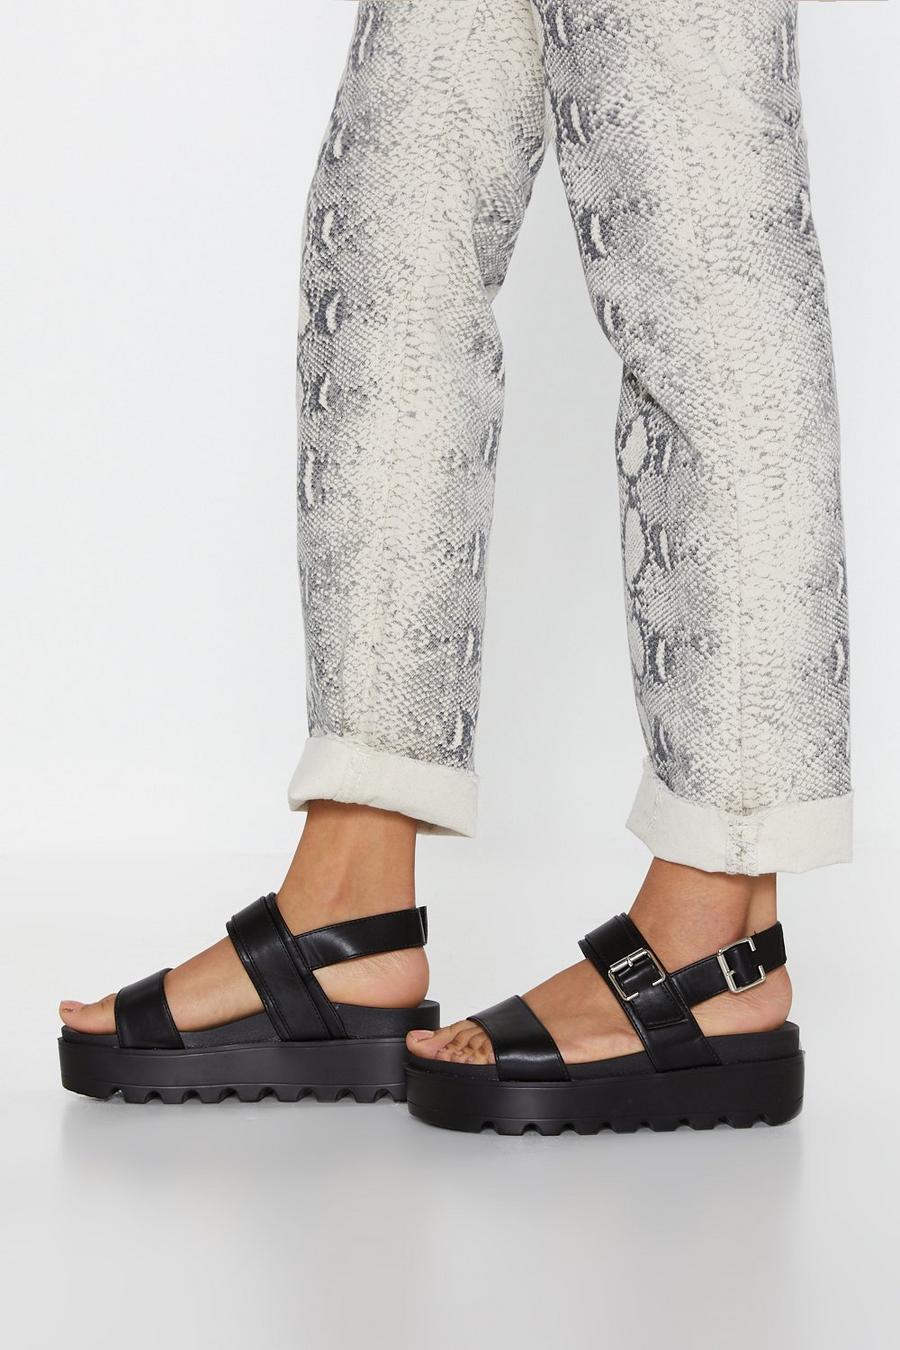 Work Your Way Up Faux Leather Platform Sandals